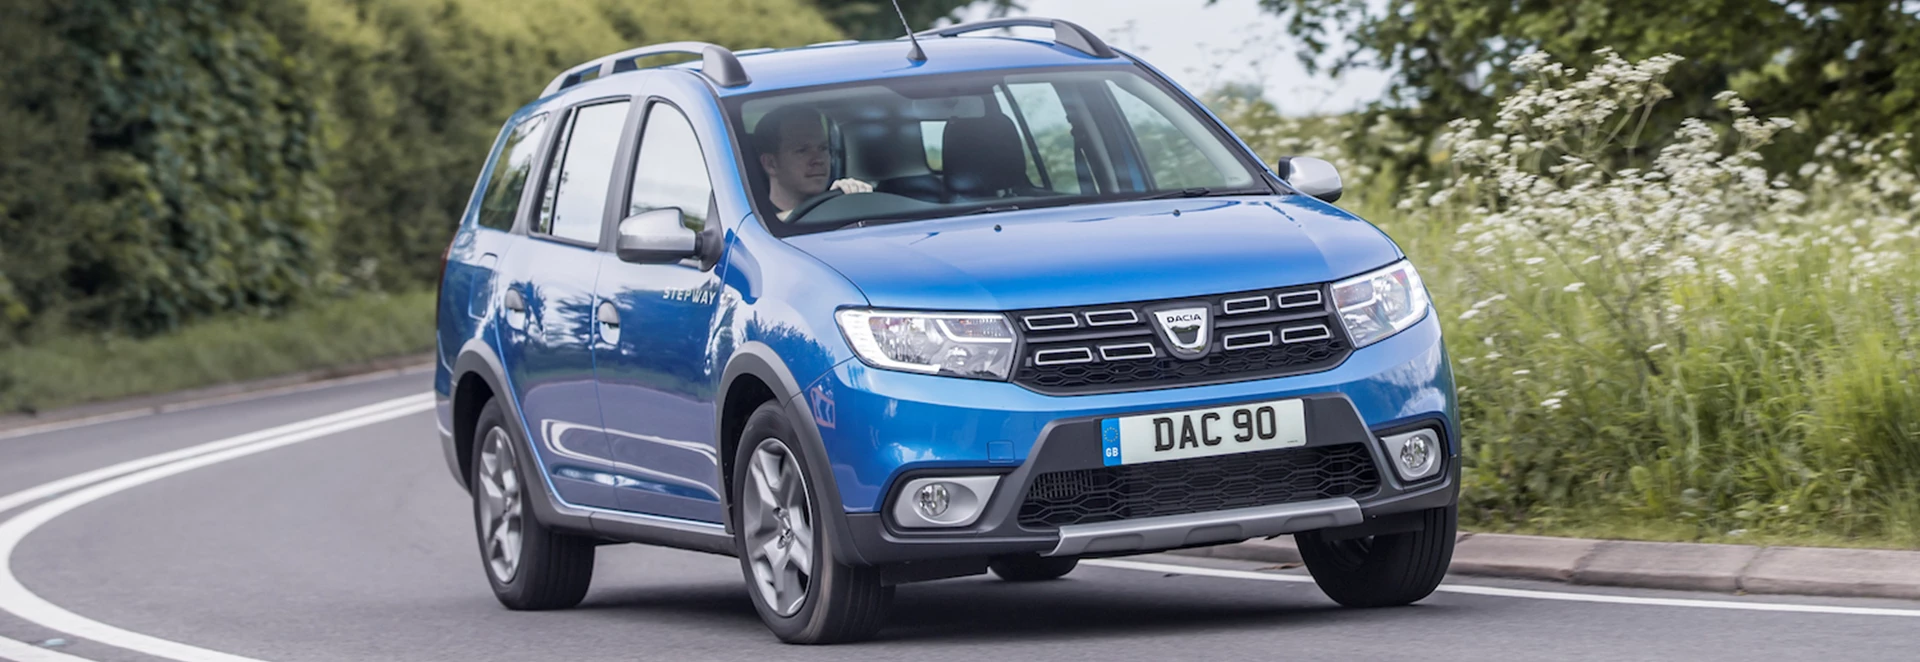 Buyer’s Guide to the Dacia Logan MCV